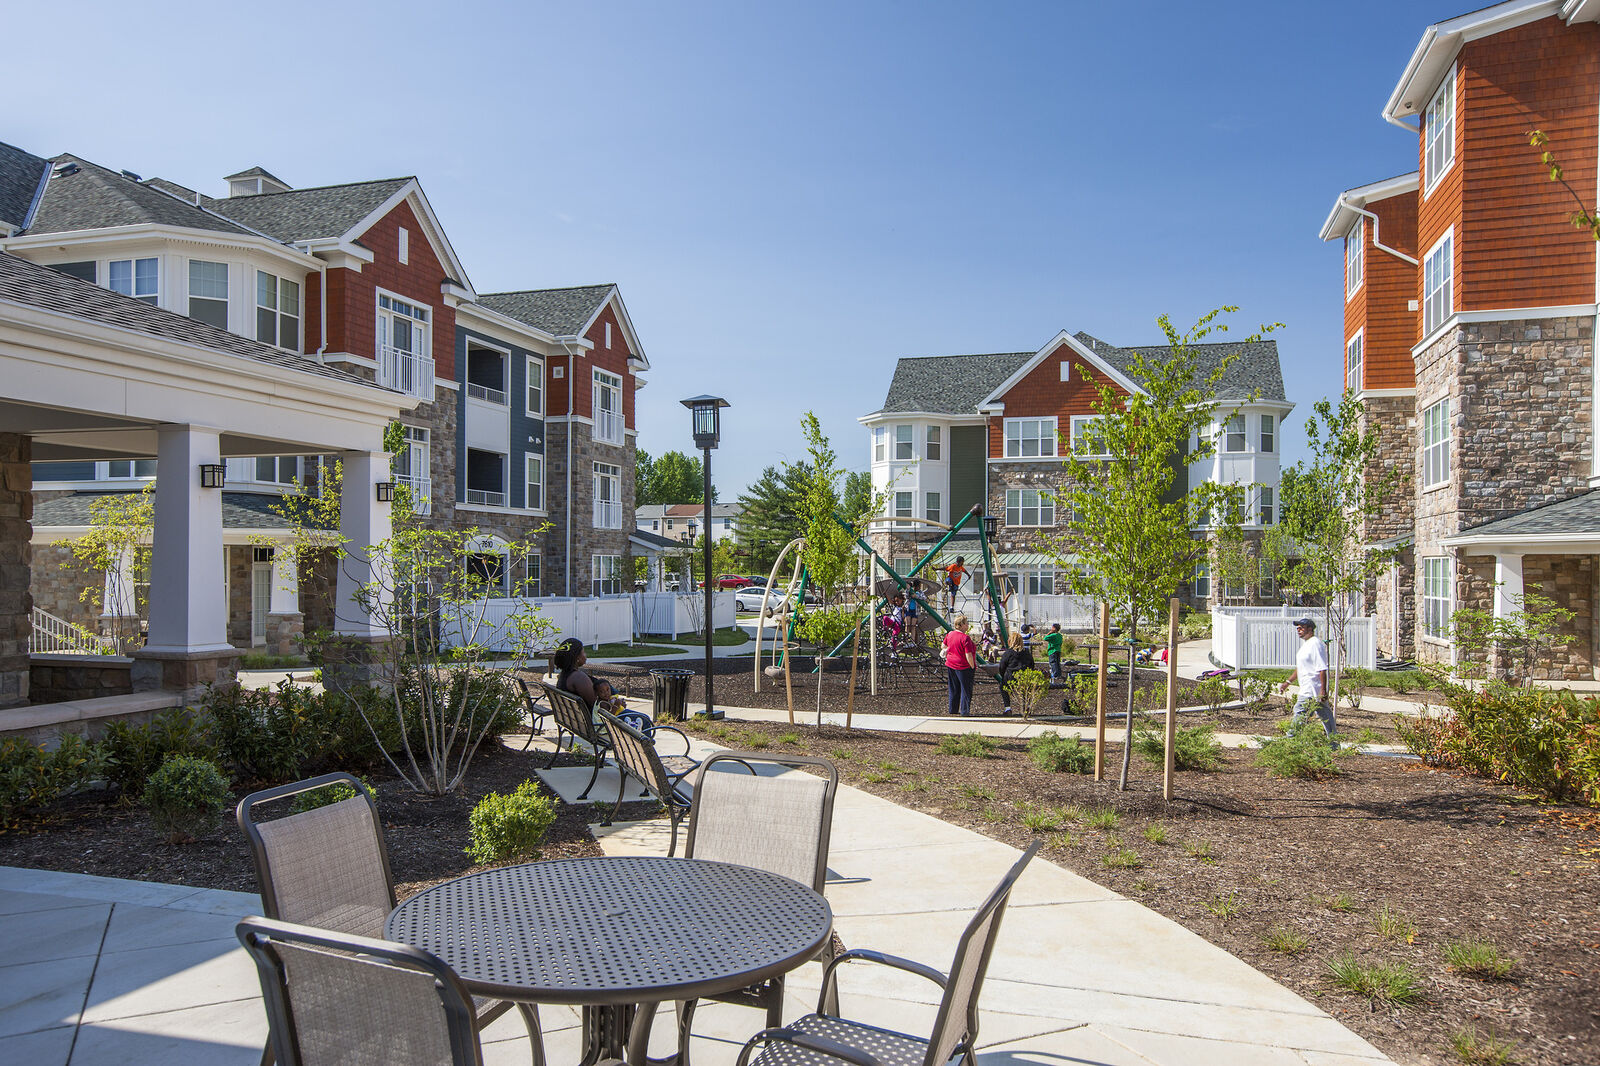 Architectural images of Columbia Maryland apartment community and senior living center at Monarch Mills